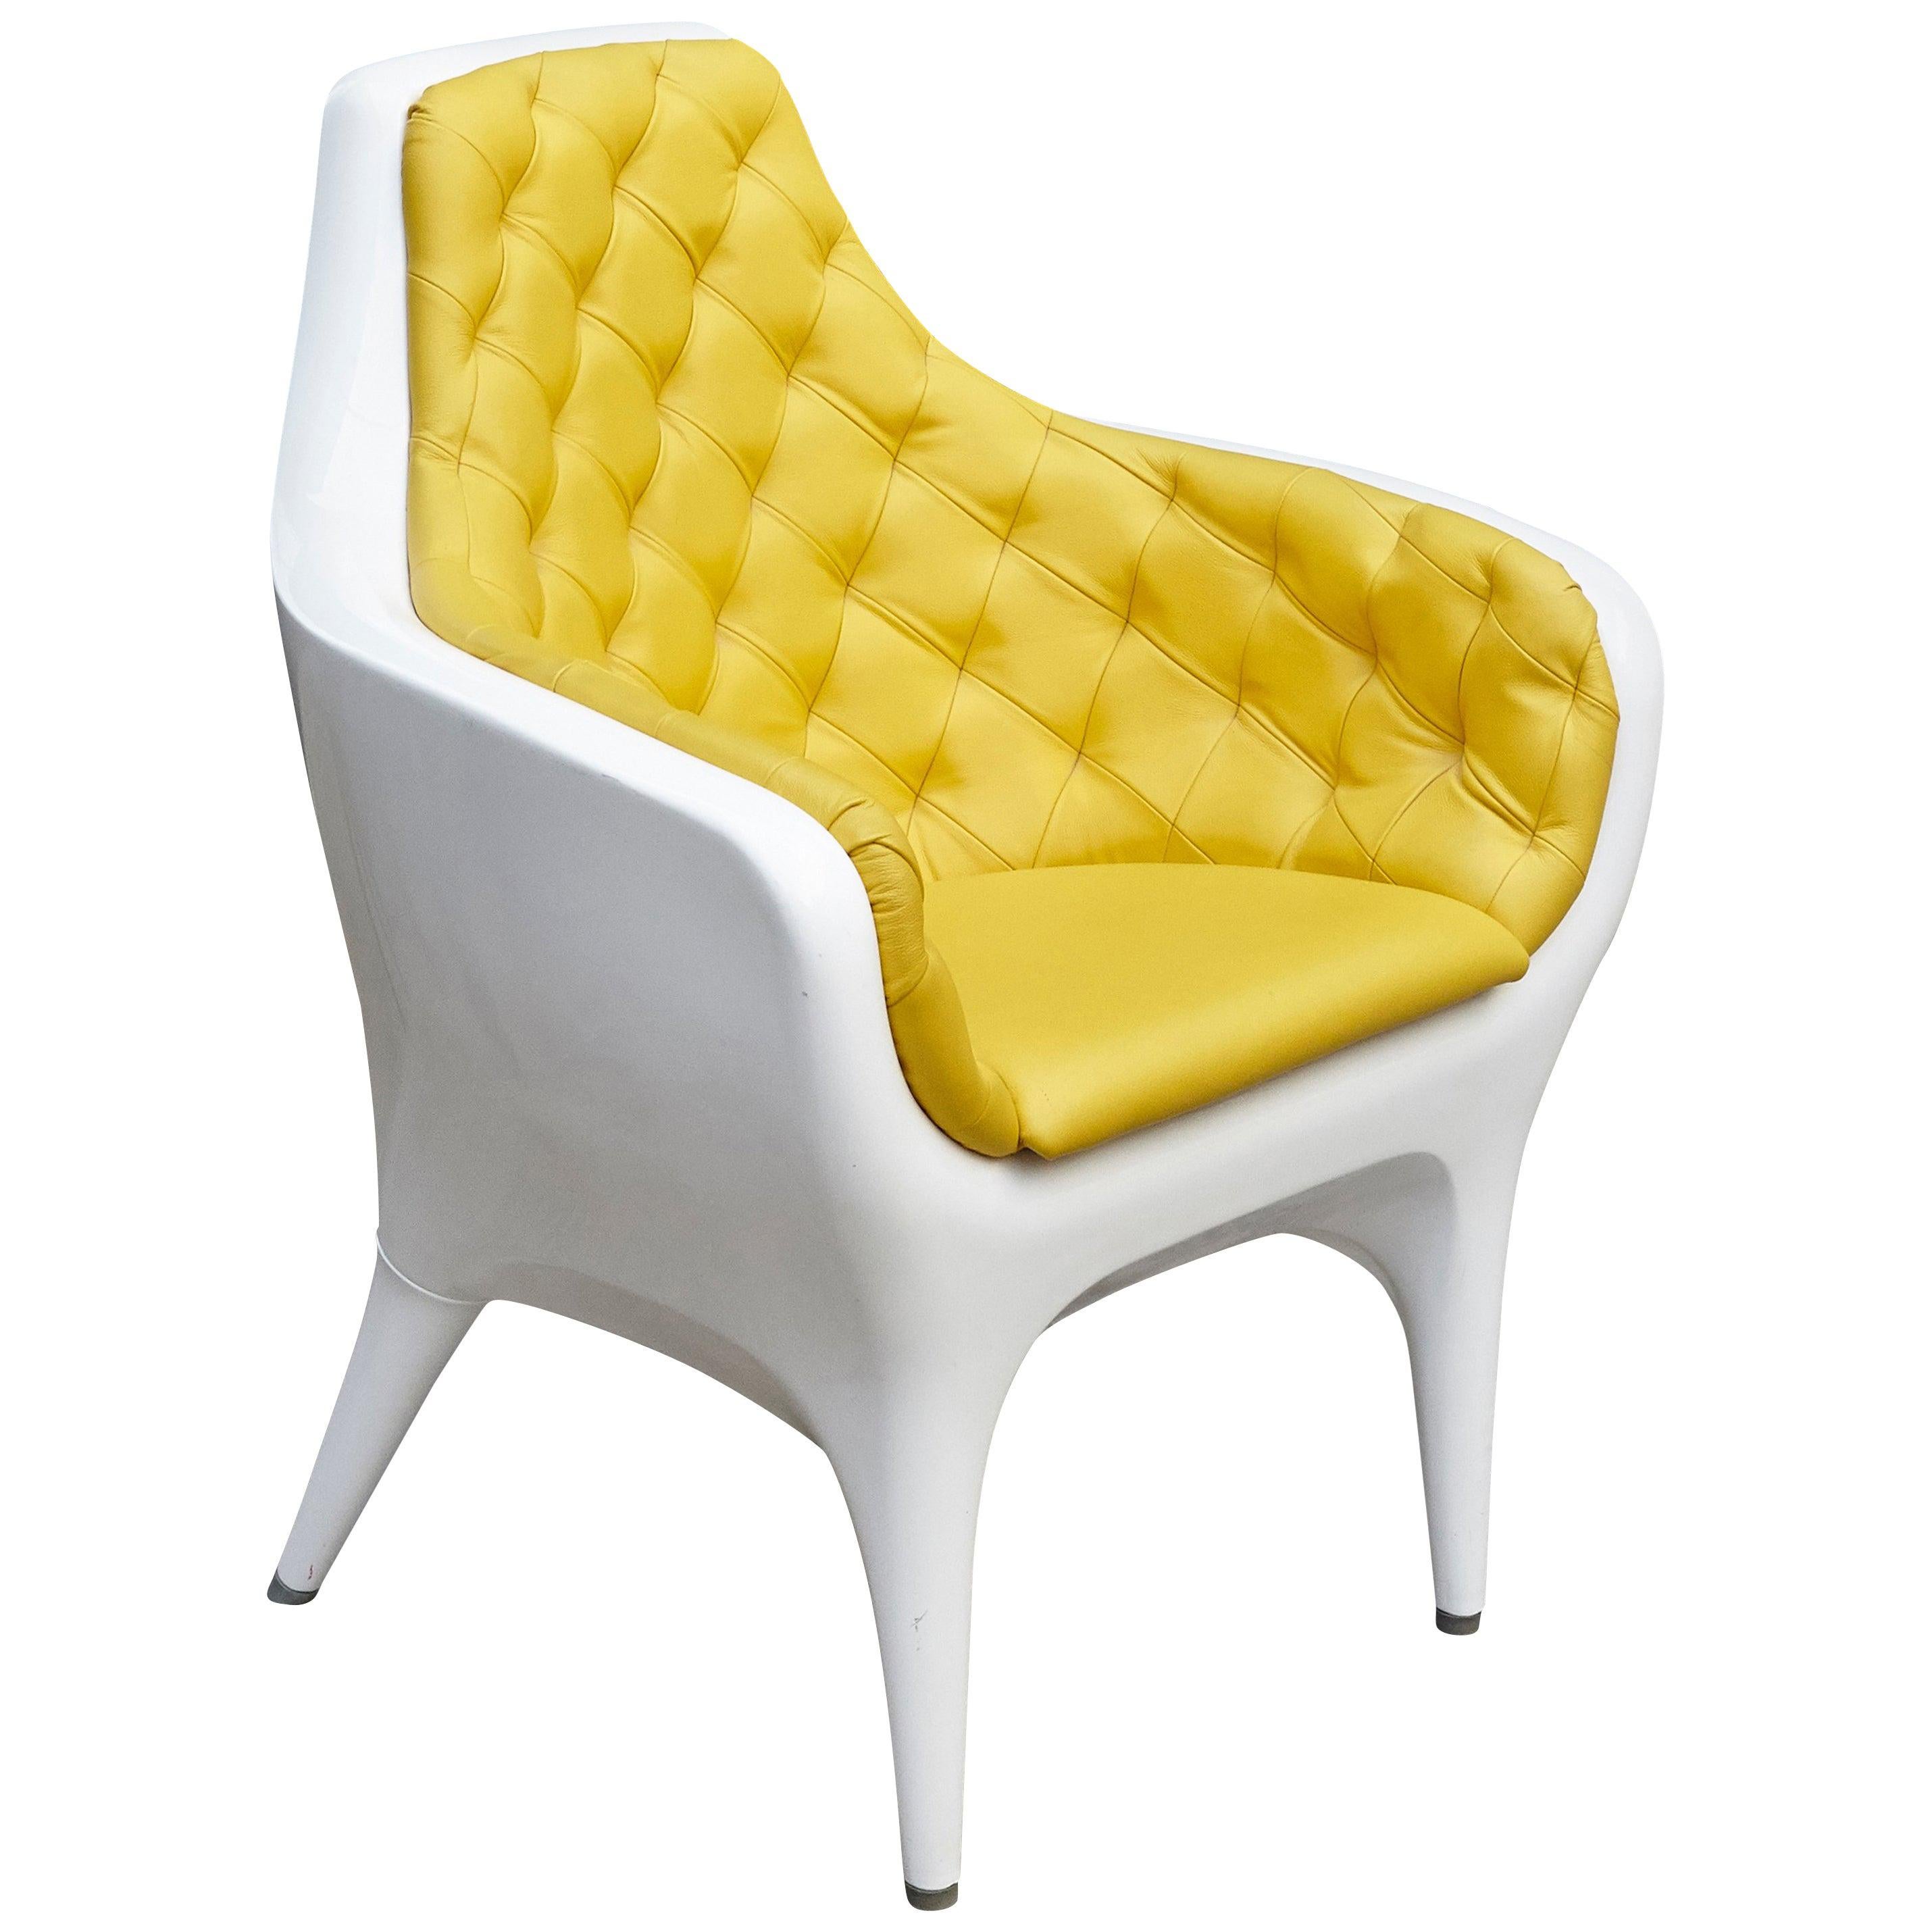 Jaime Hayon Contemporary Showtime Armchair Lacquered White and Yellow